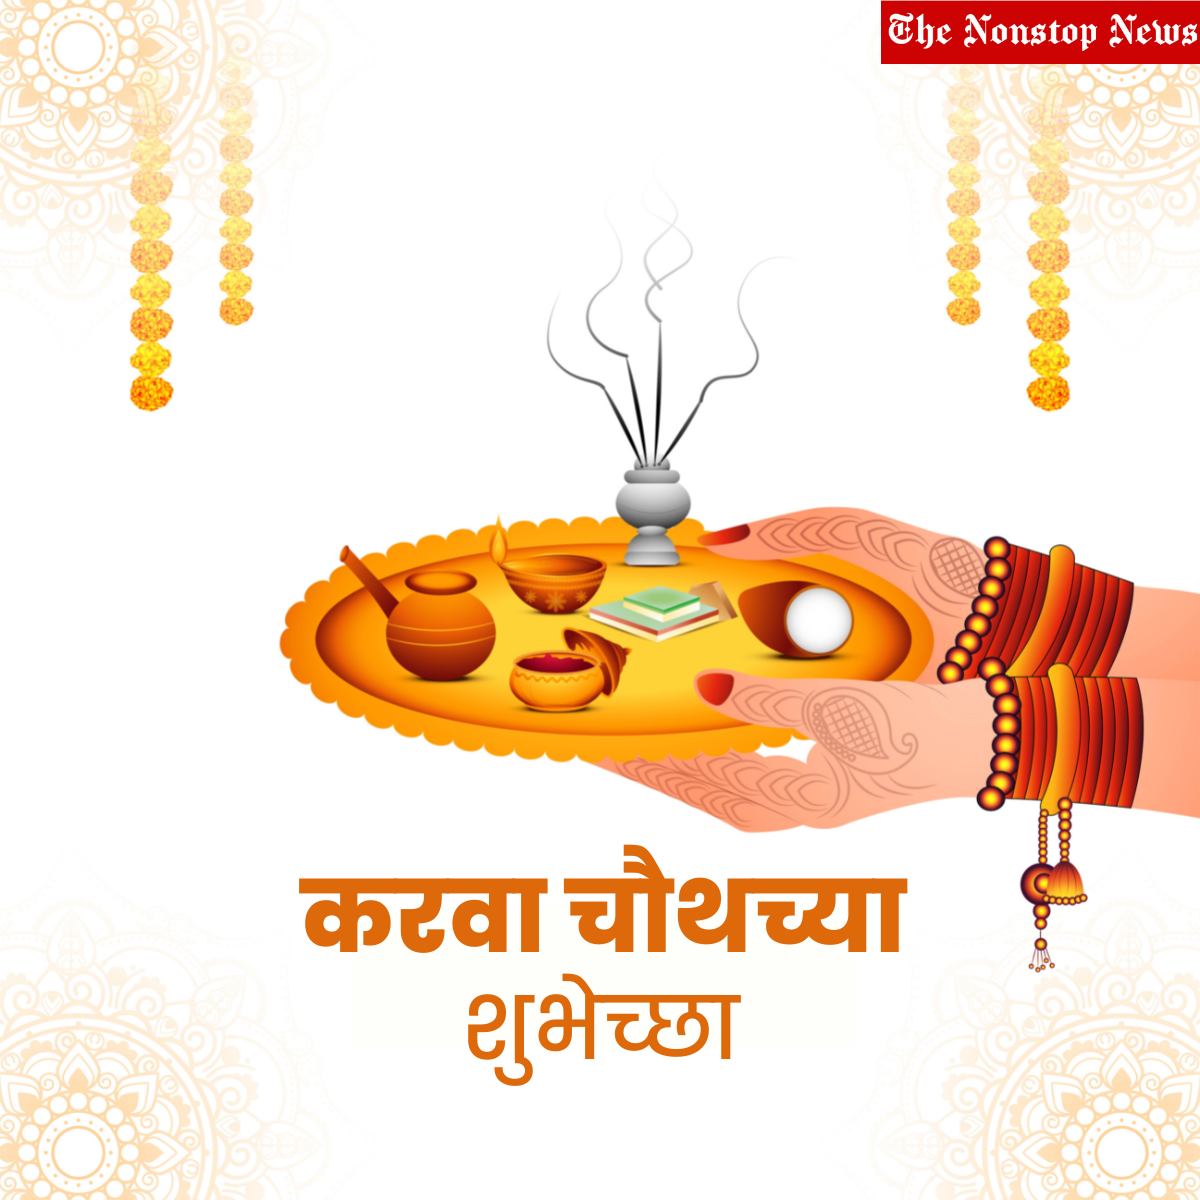 Karwa Chauth Greetings in Marathi 2022 HD Images, Posters, Messages, Quotes, and Wishes